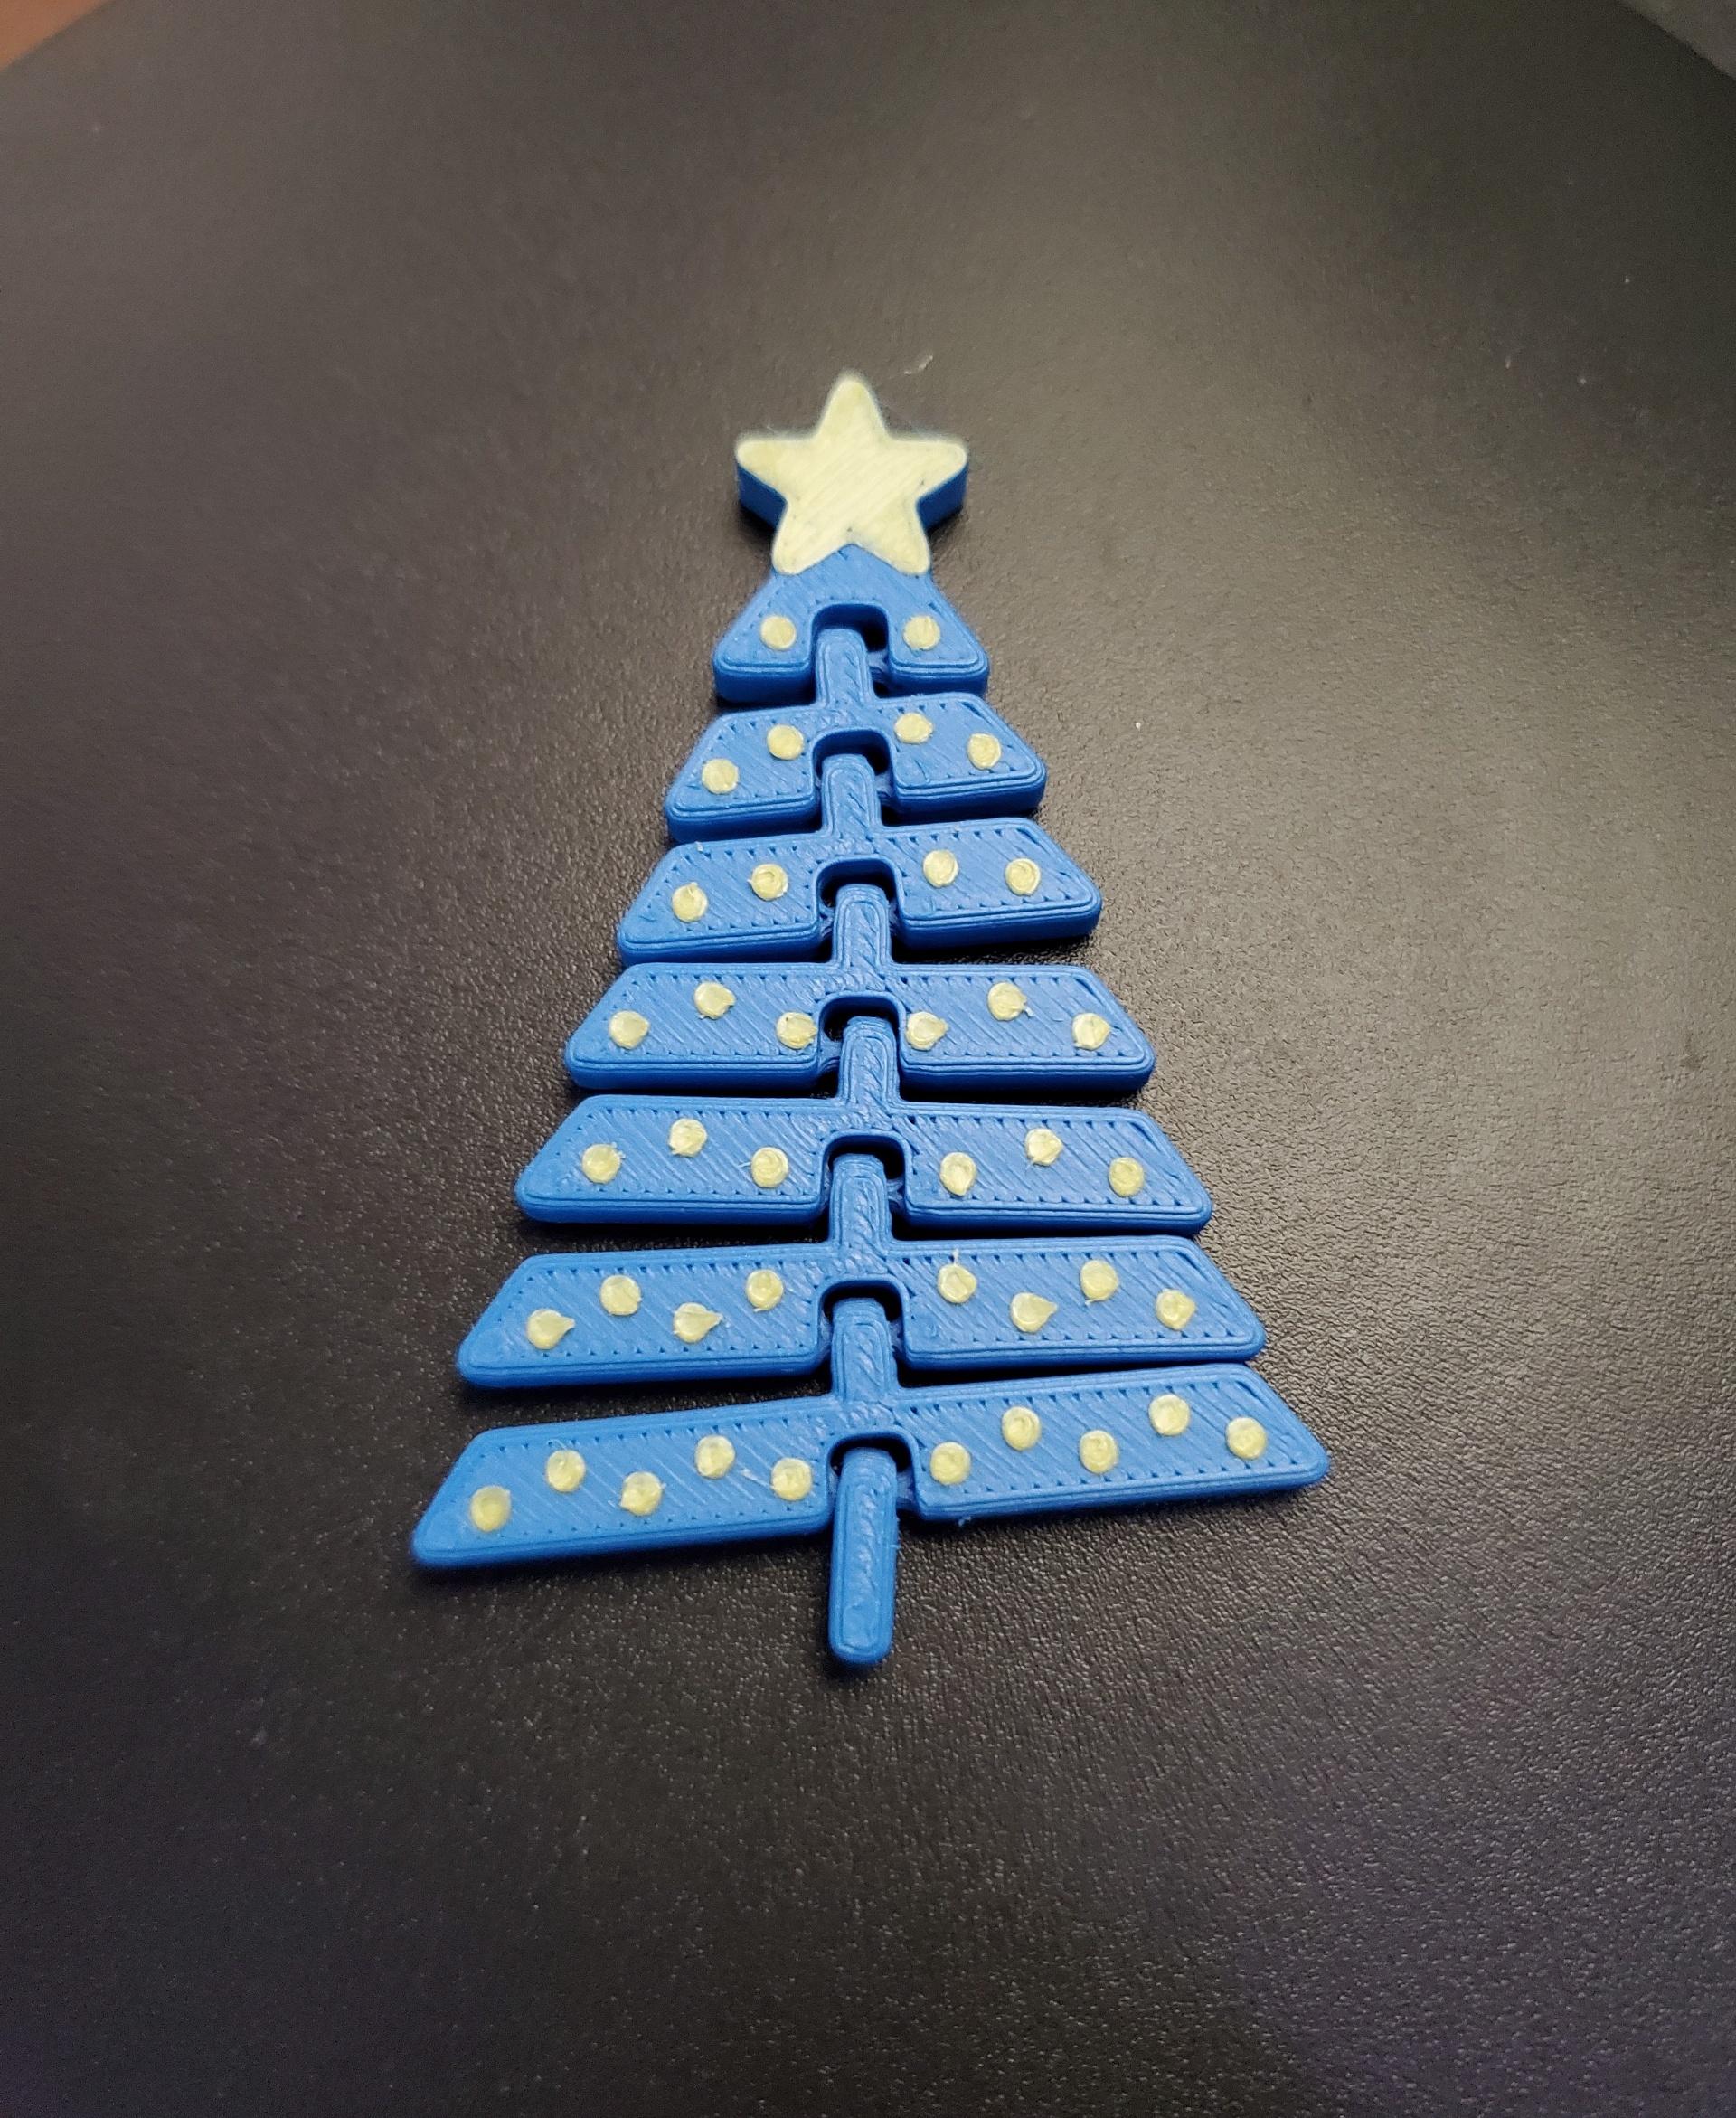 Articulated Christmas Tree with Star and Ornaments - Print in place fidget toys - 3mf - polyterra sapphire blue - 3d model